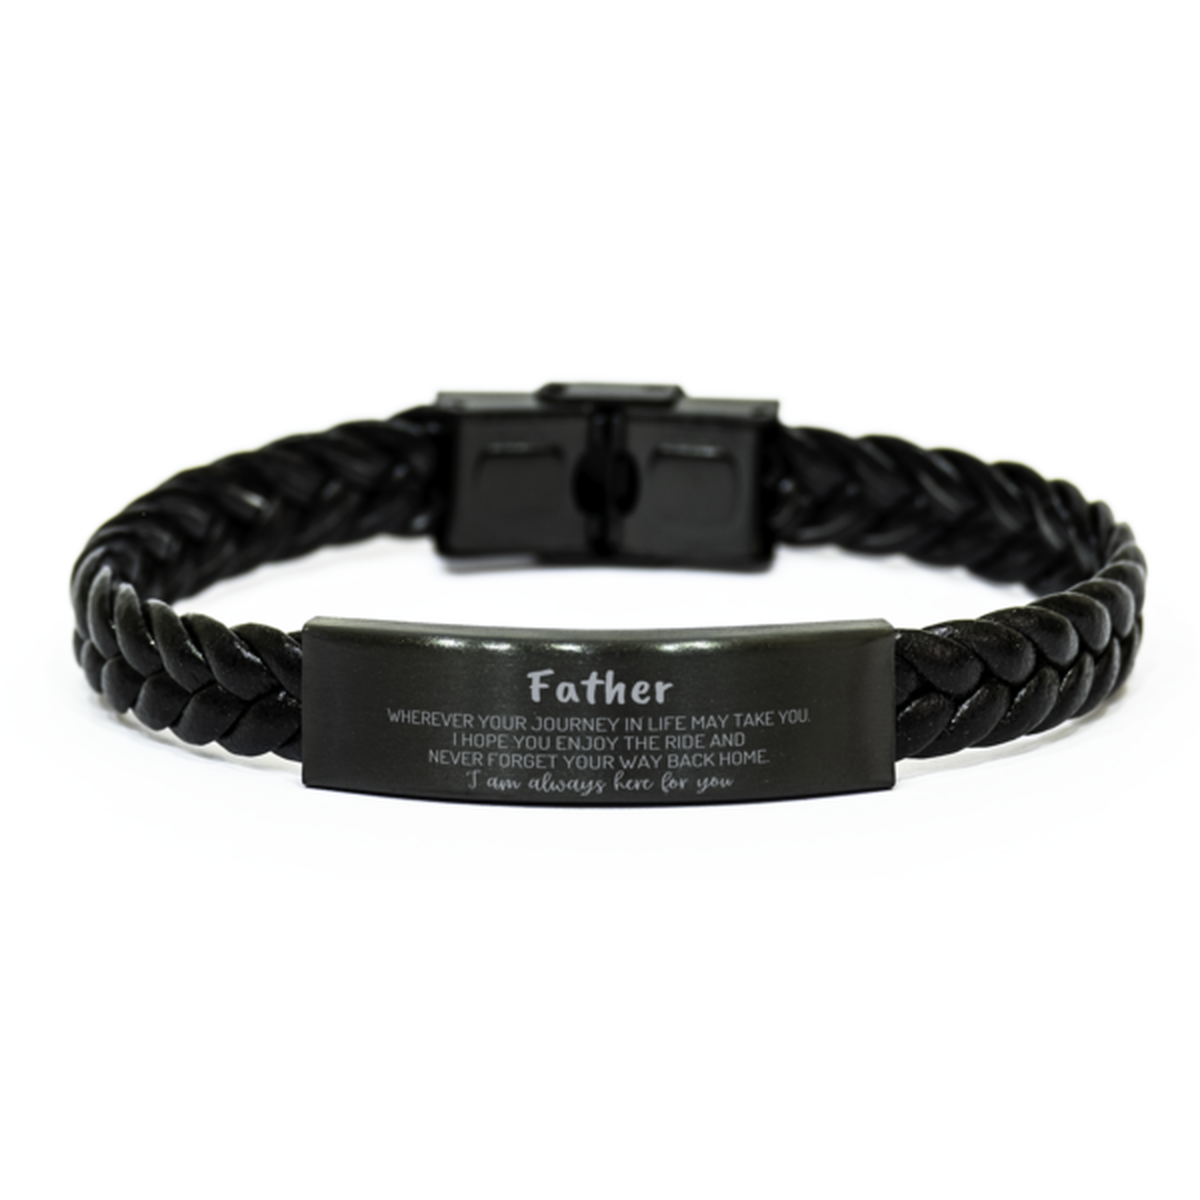 Father wherever your journey in life may take you, I am always here for you Father Braided Leather Bracelet, Awesome Christmas Gifts For Father, Father Birthday Gifts for Men Women Family Loved One